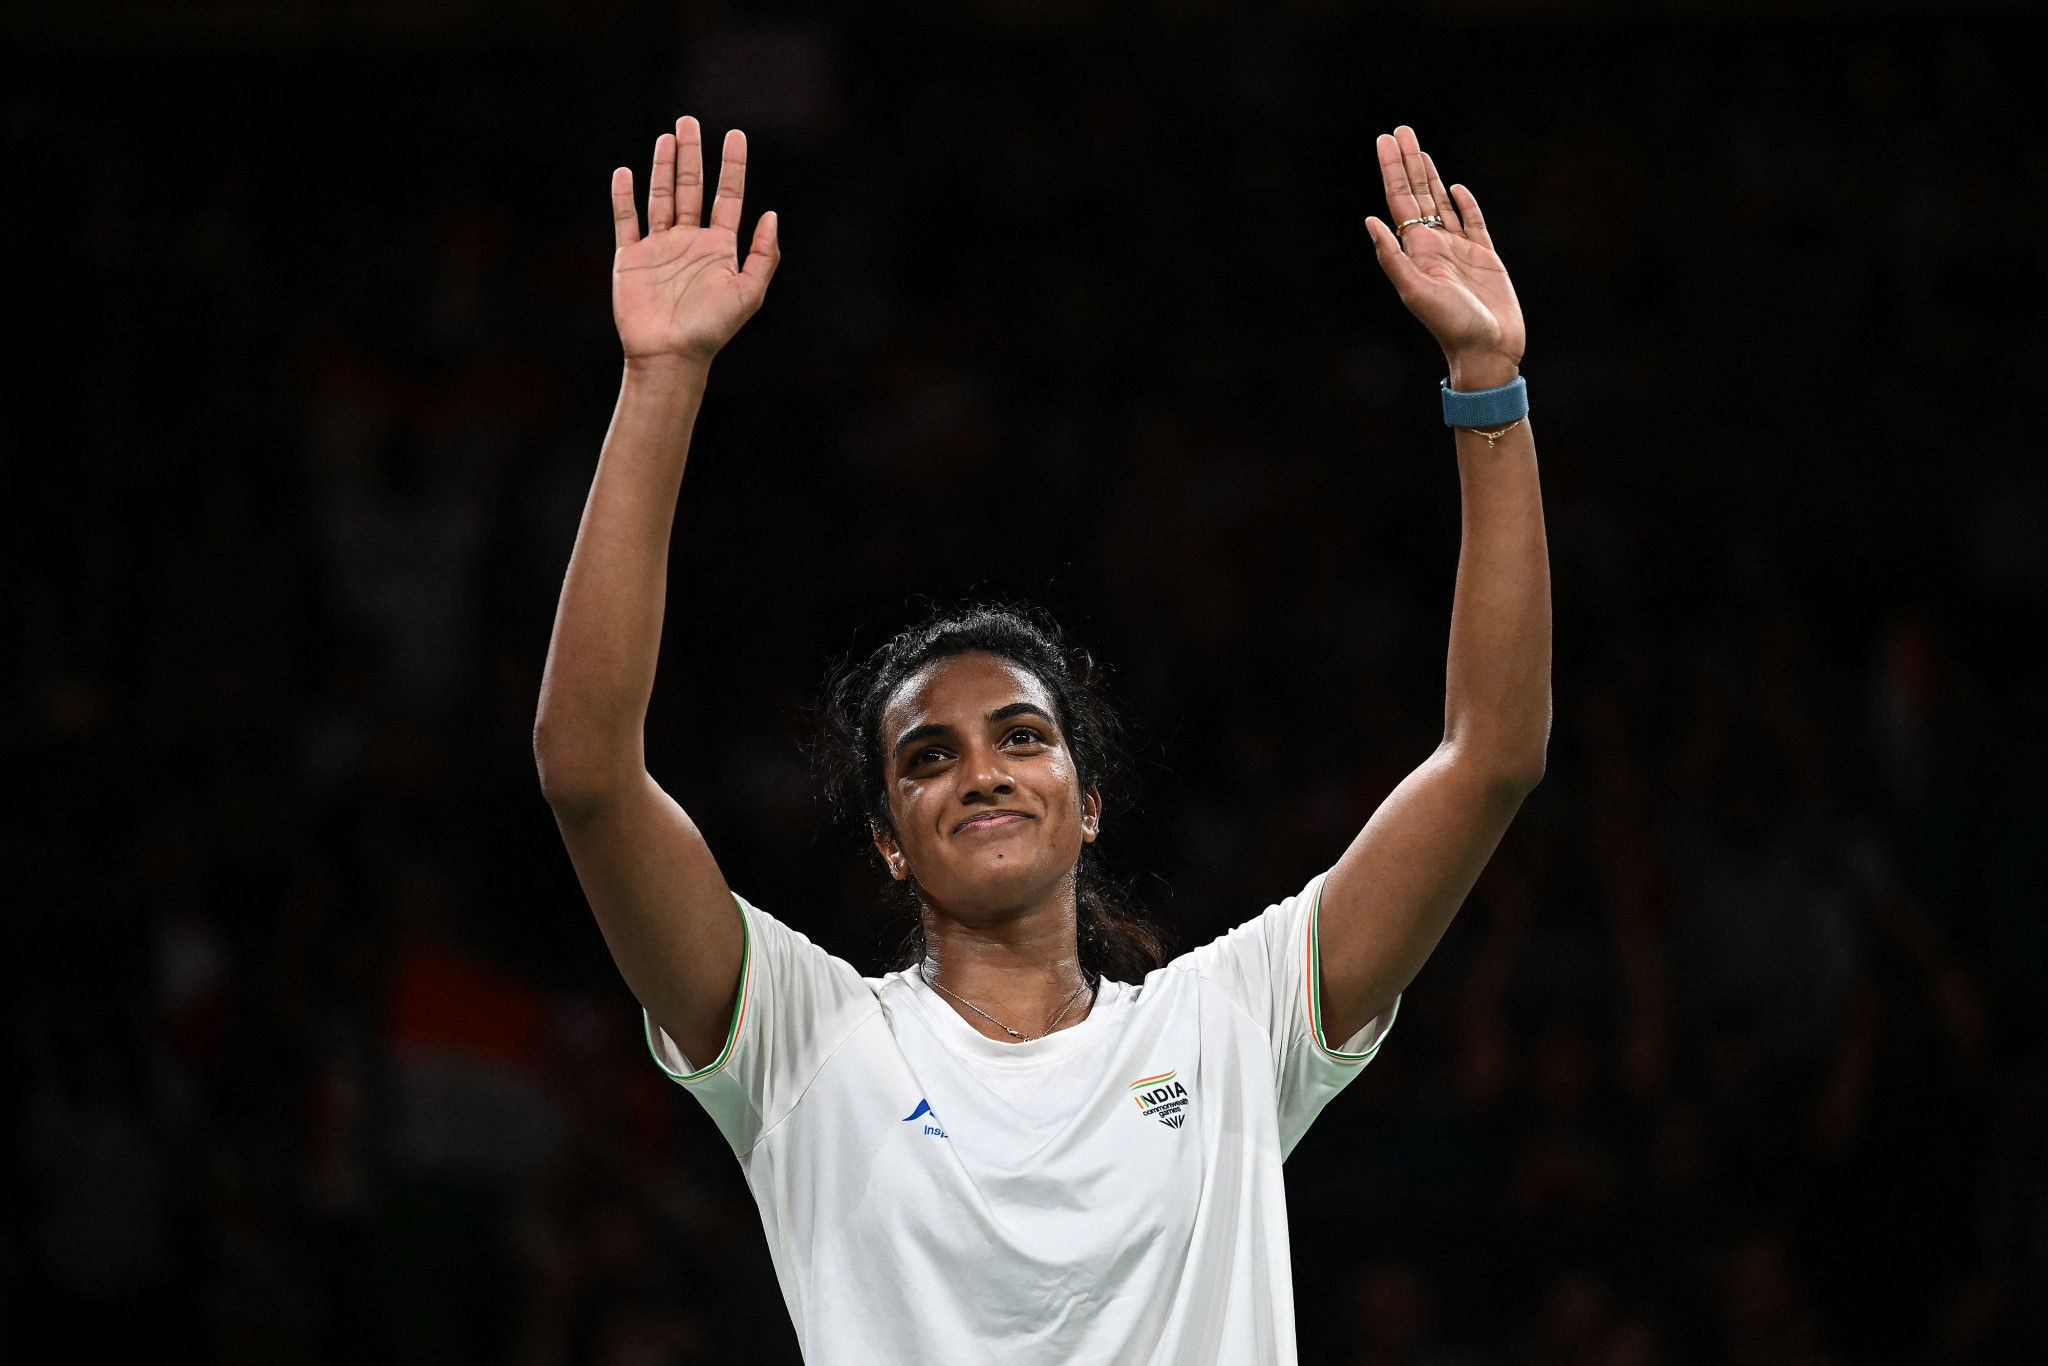 PV Sindhu won the women's singles title today in Birmingham ©Getty Images